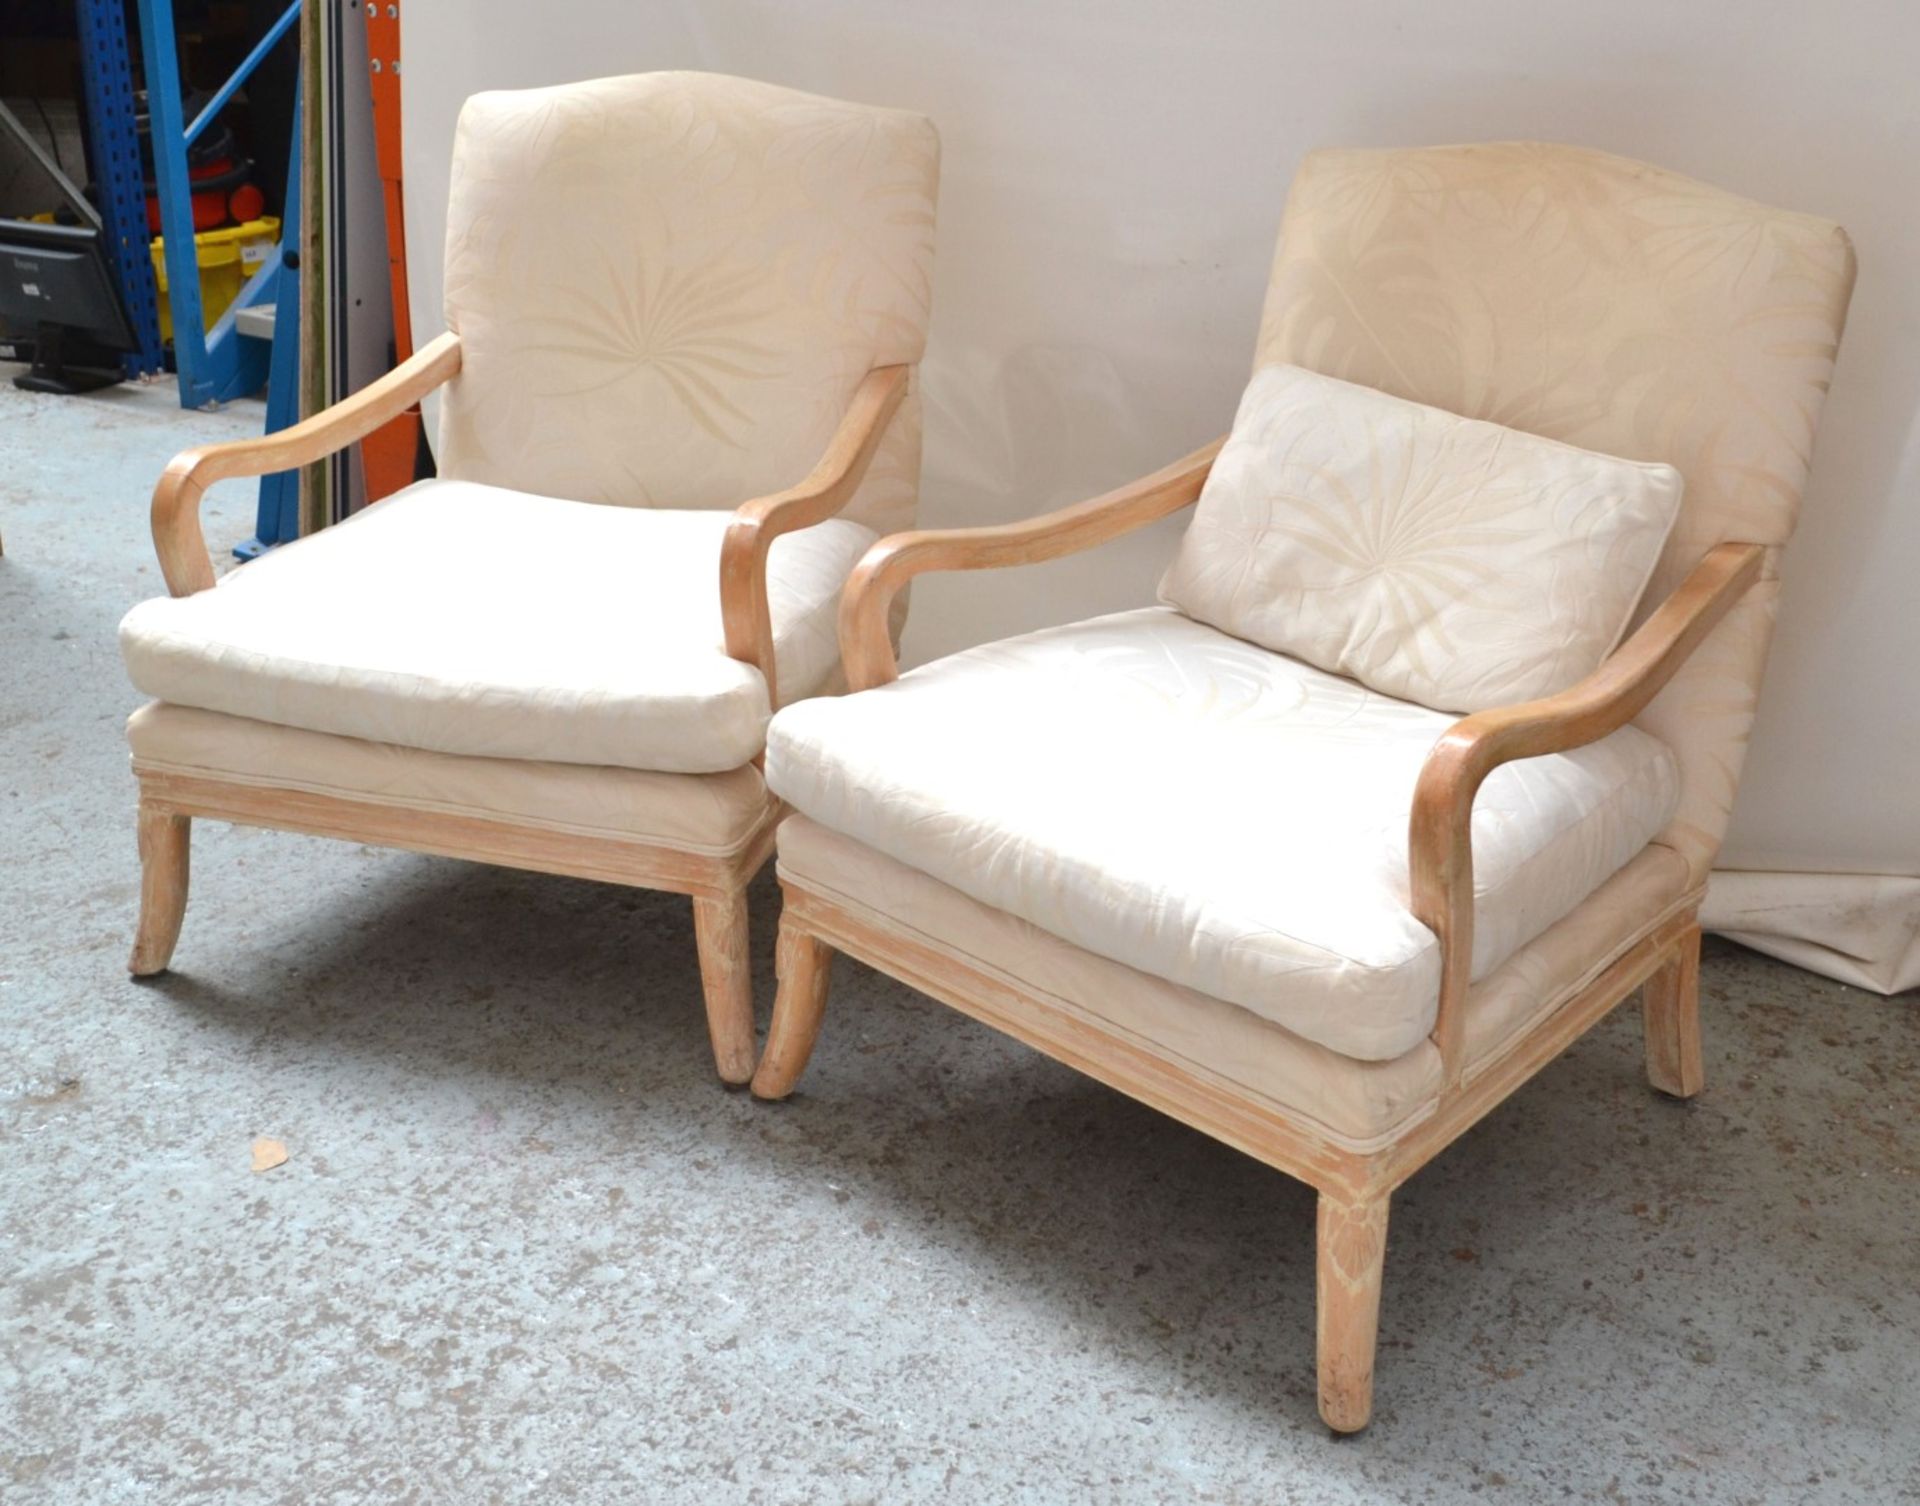 Pair of Cream Arm Chairs - CL314 - Location: Altrincham WA14 - *NO VAT On Hammer*Dimensions: